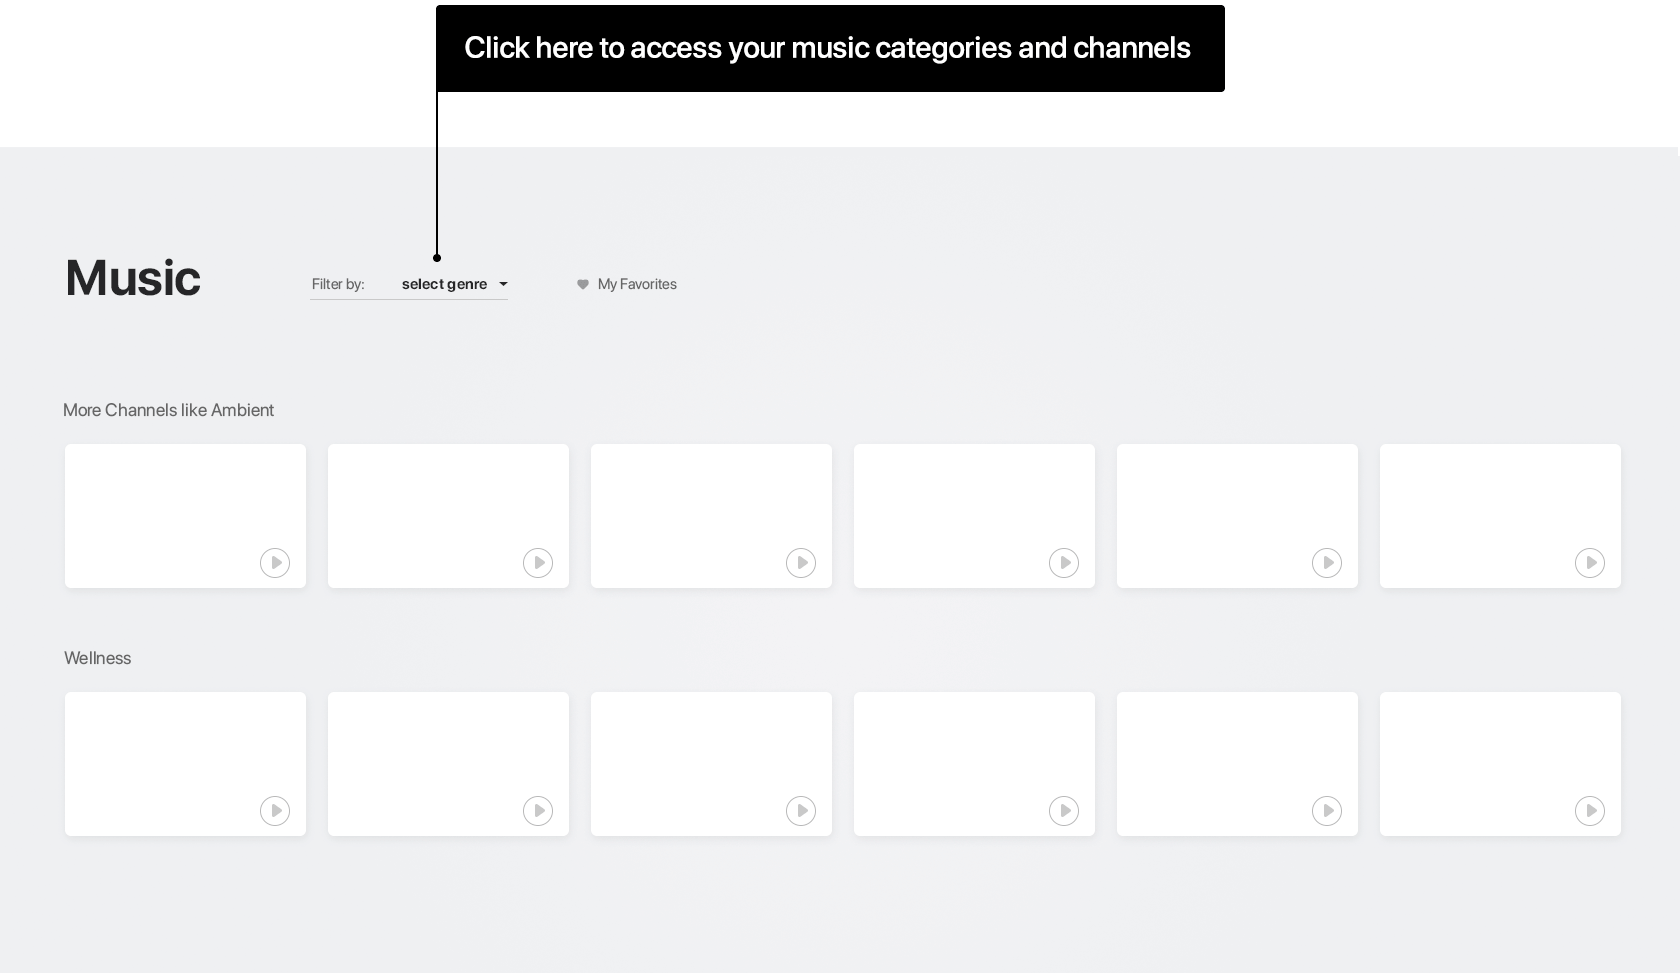 Access to music categories